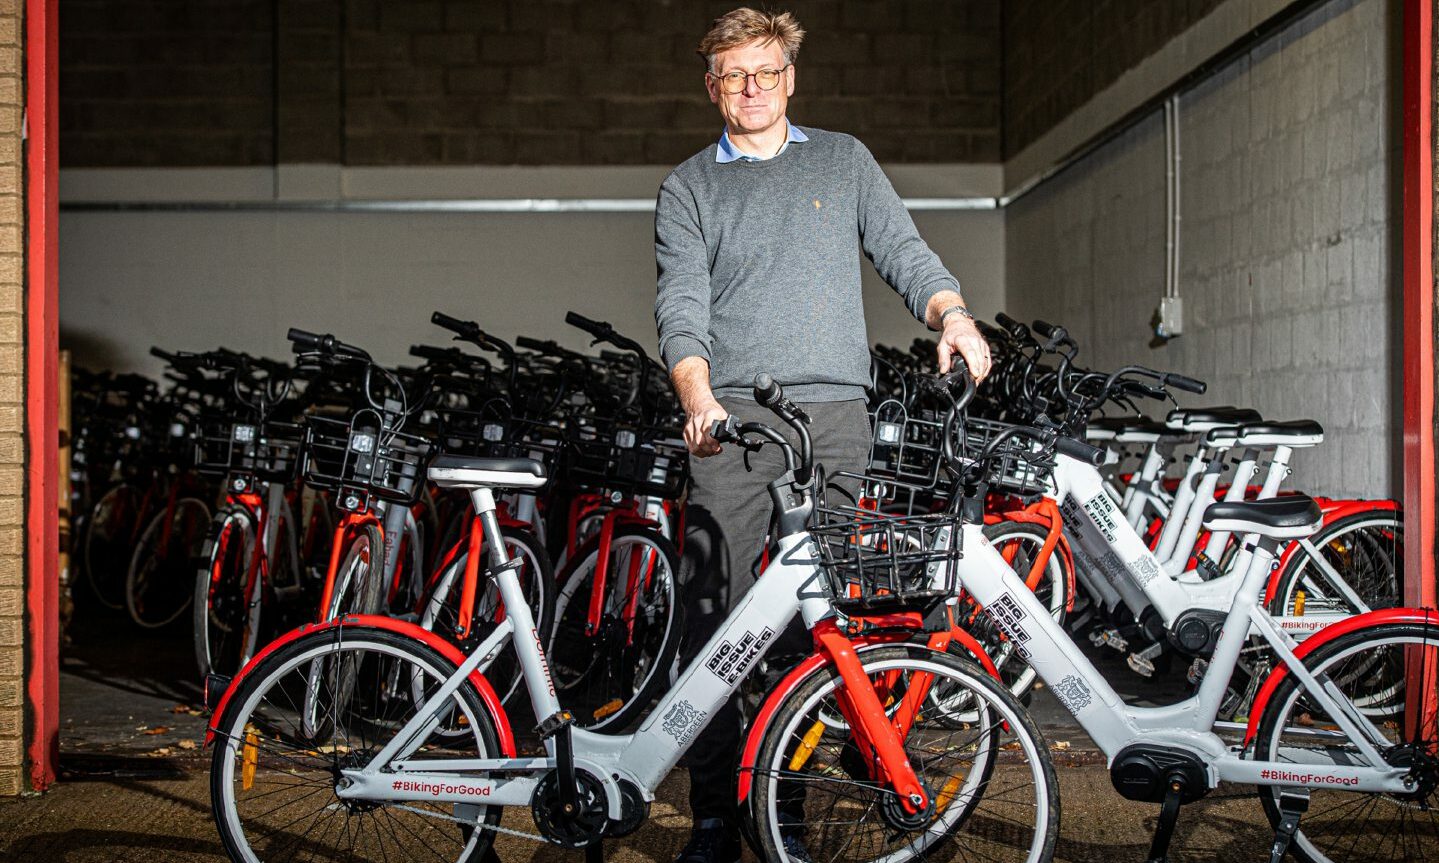 Jan Tore Endresen, CEO of Big Issue eBikes